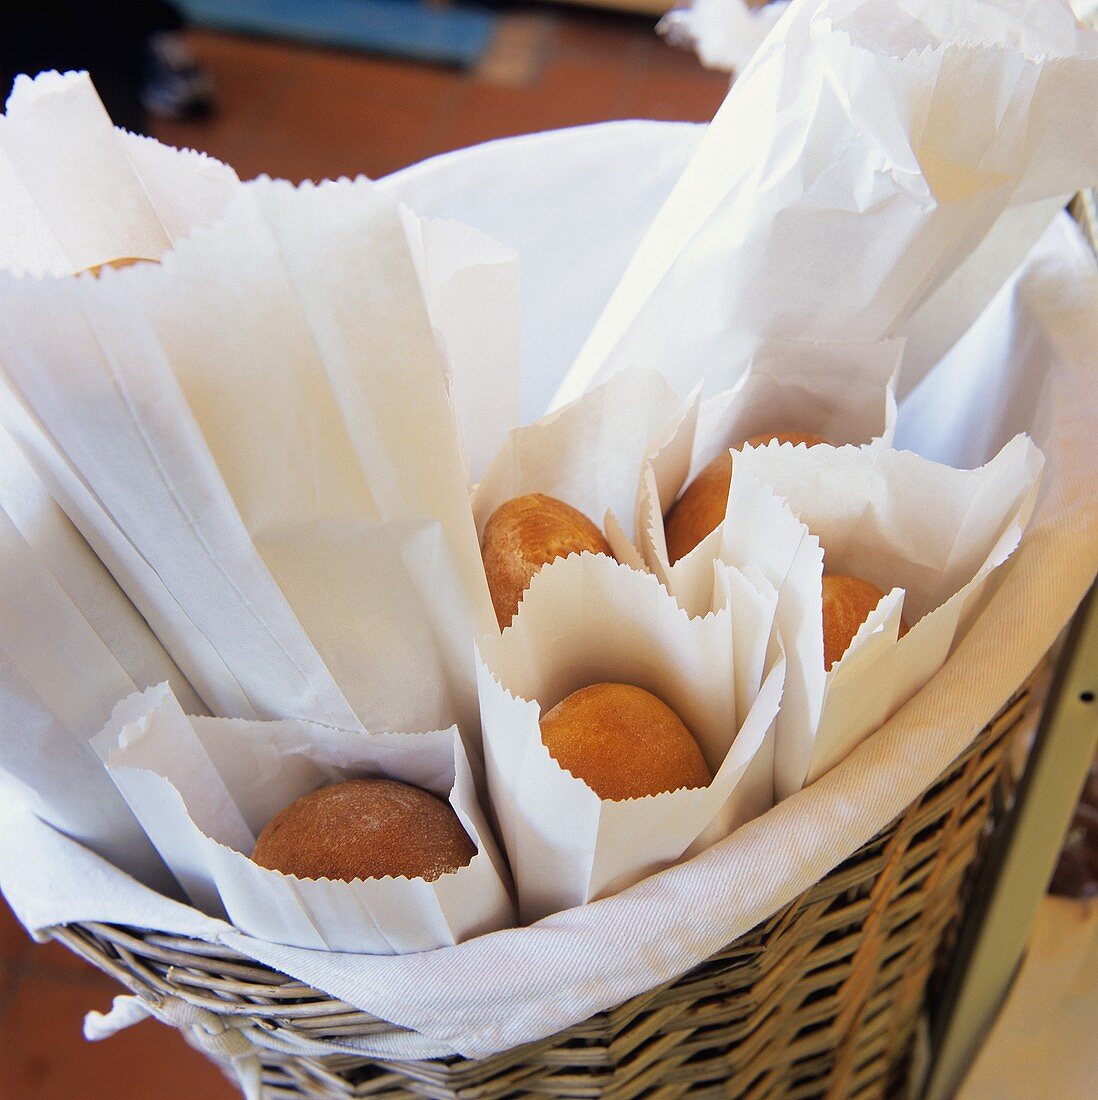 Fresh Baked Bread in Paper Bags in a Large Basket